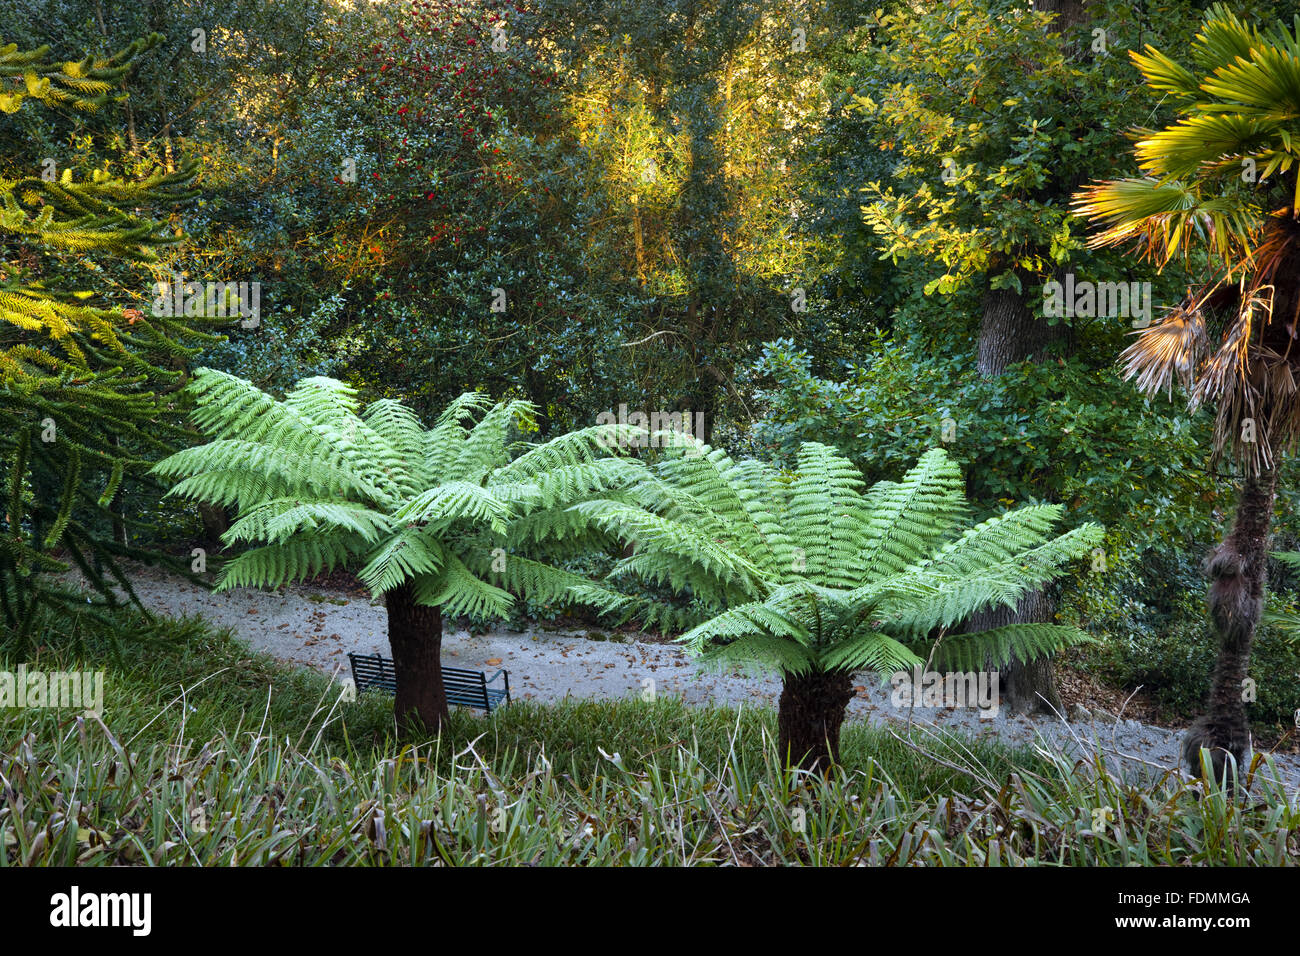 Tree ferns in October near the Celtic Cross at Trelissick Garden, Cornwall. Stock Photo